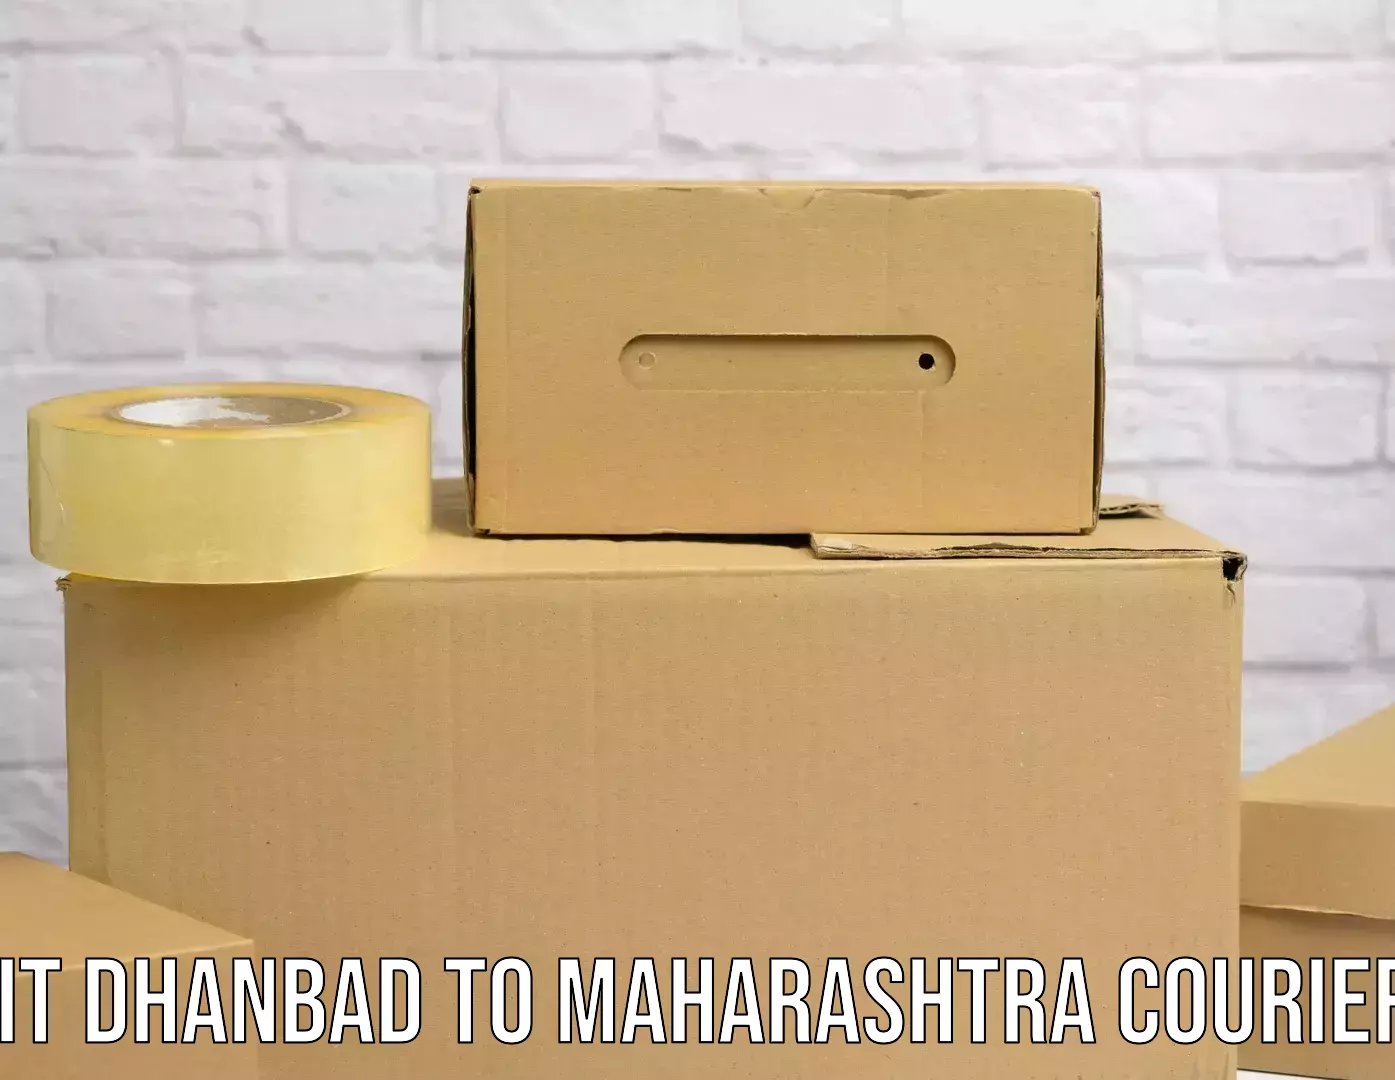 Weekend courier service IIT Dhanbad to Paithan